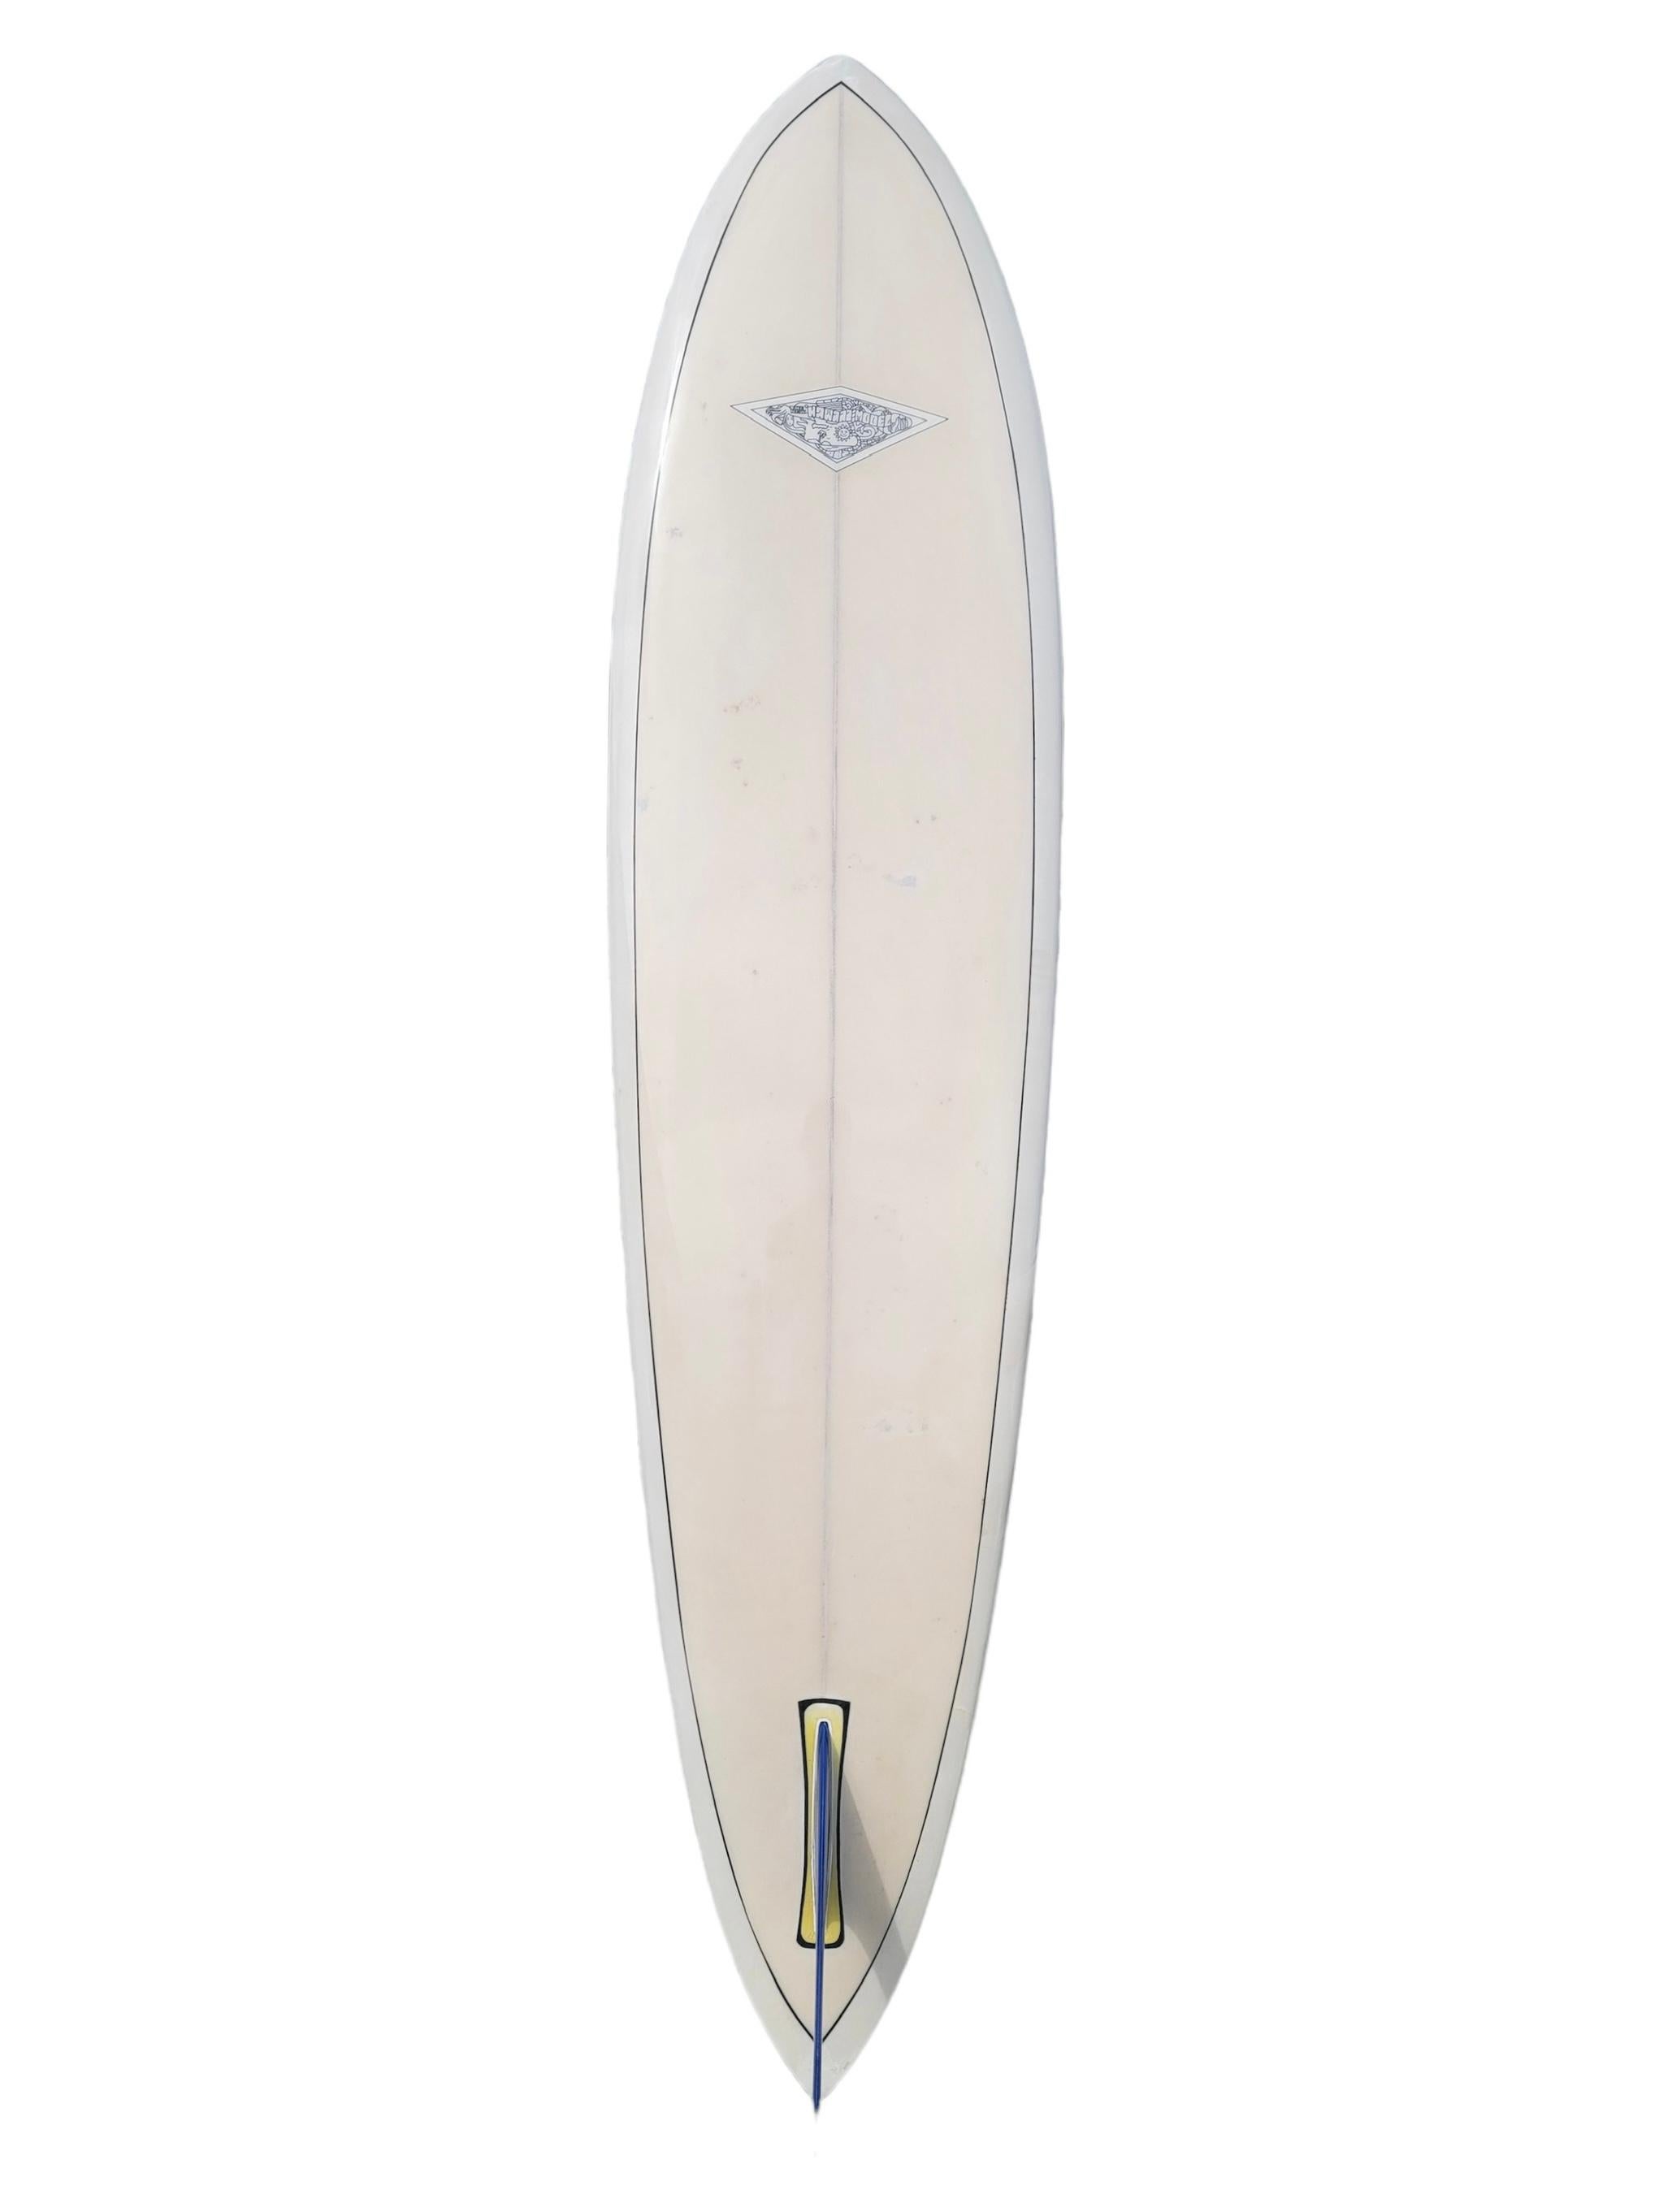 Vintage 1967 Hobie Hawaii model surfboard. Features a pintail shape design with white pigment and bright blue pinstriping. Very low production Hobie Hawaii model logo. As seen in “The Ultimate Guide to Vintage Surfboards & Collectibles” hardcover